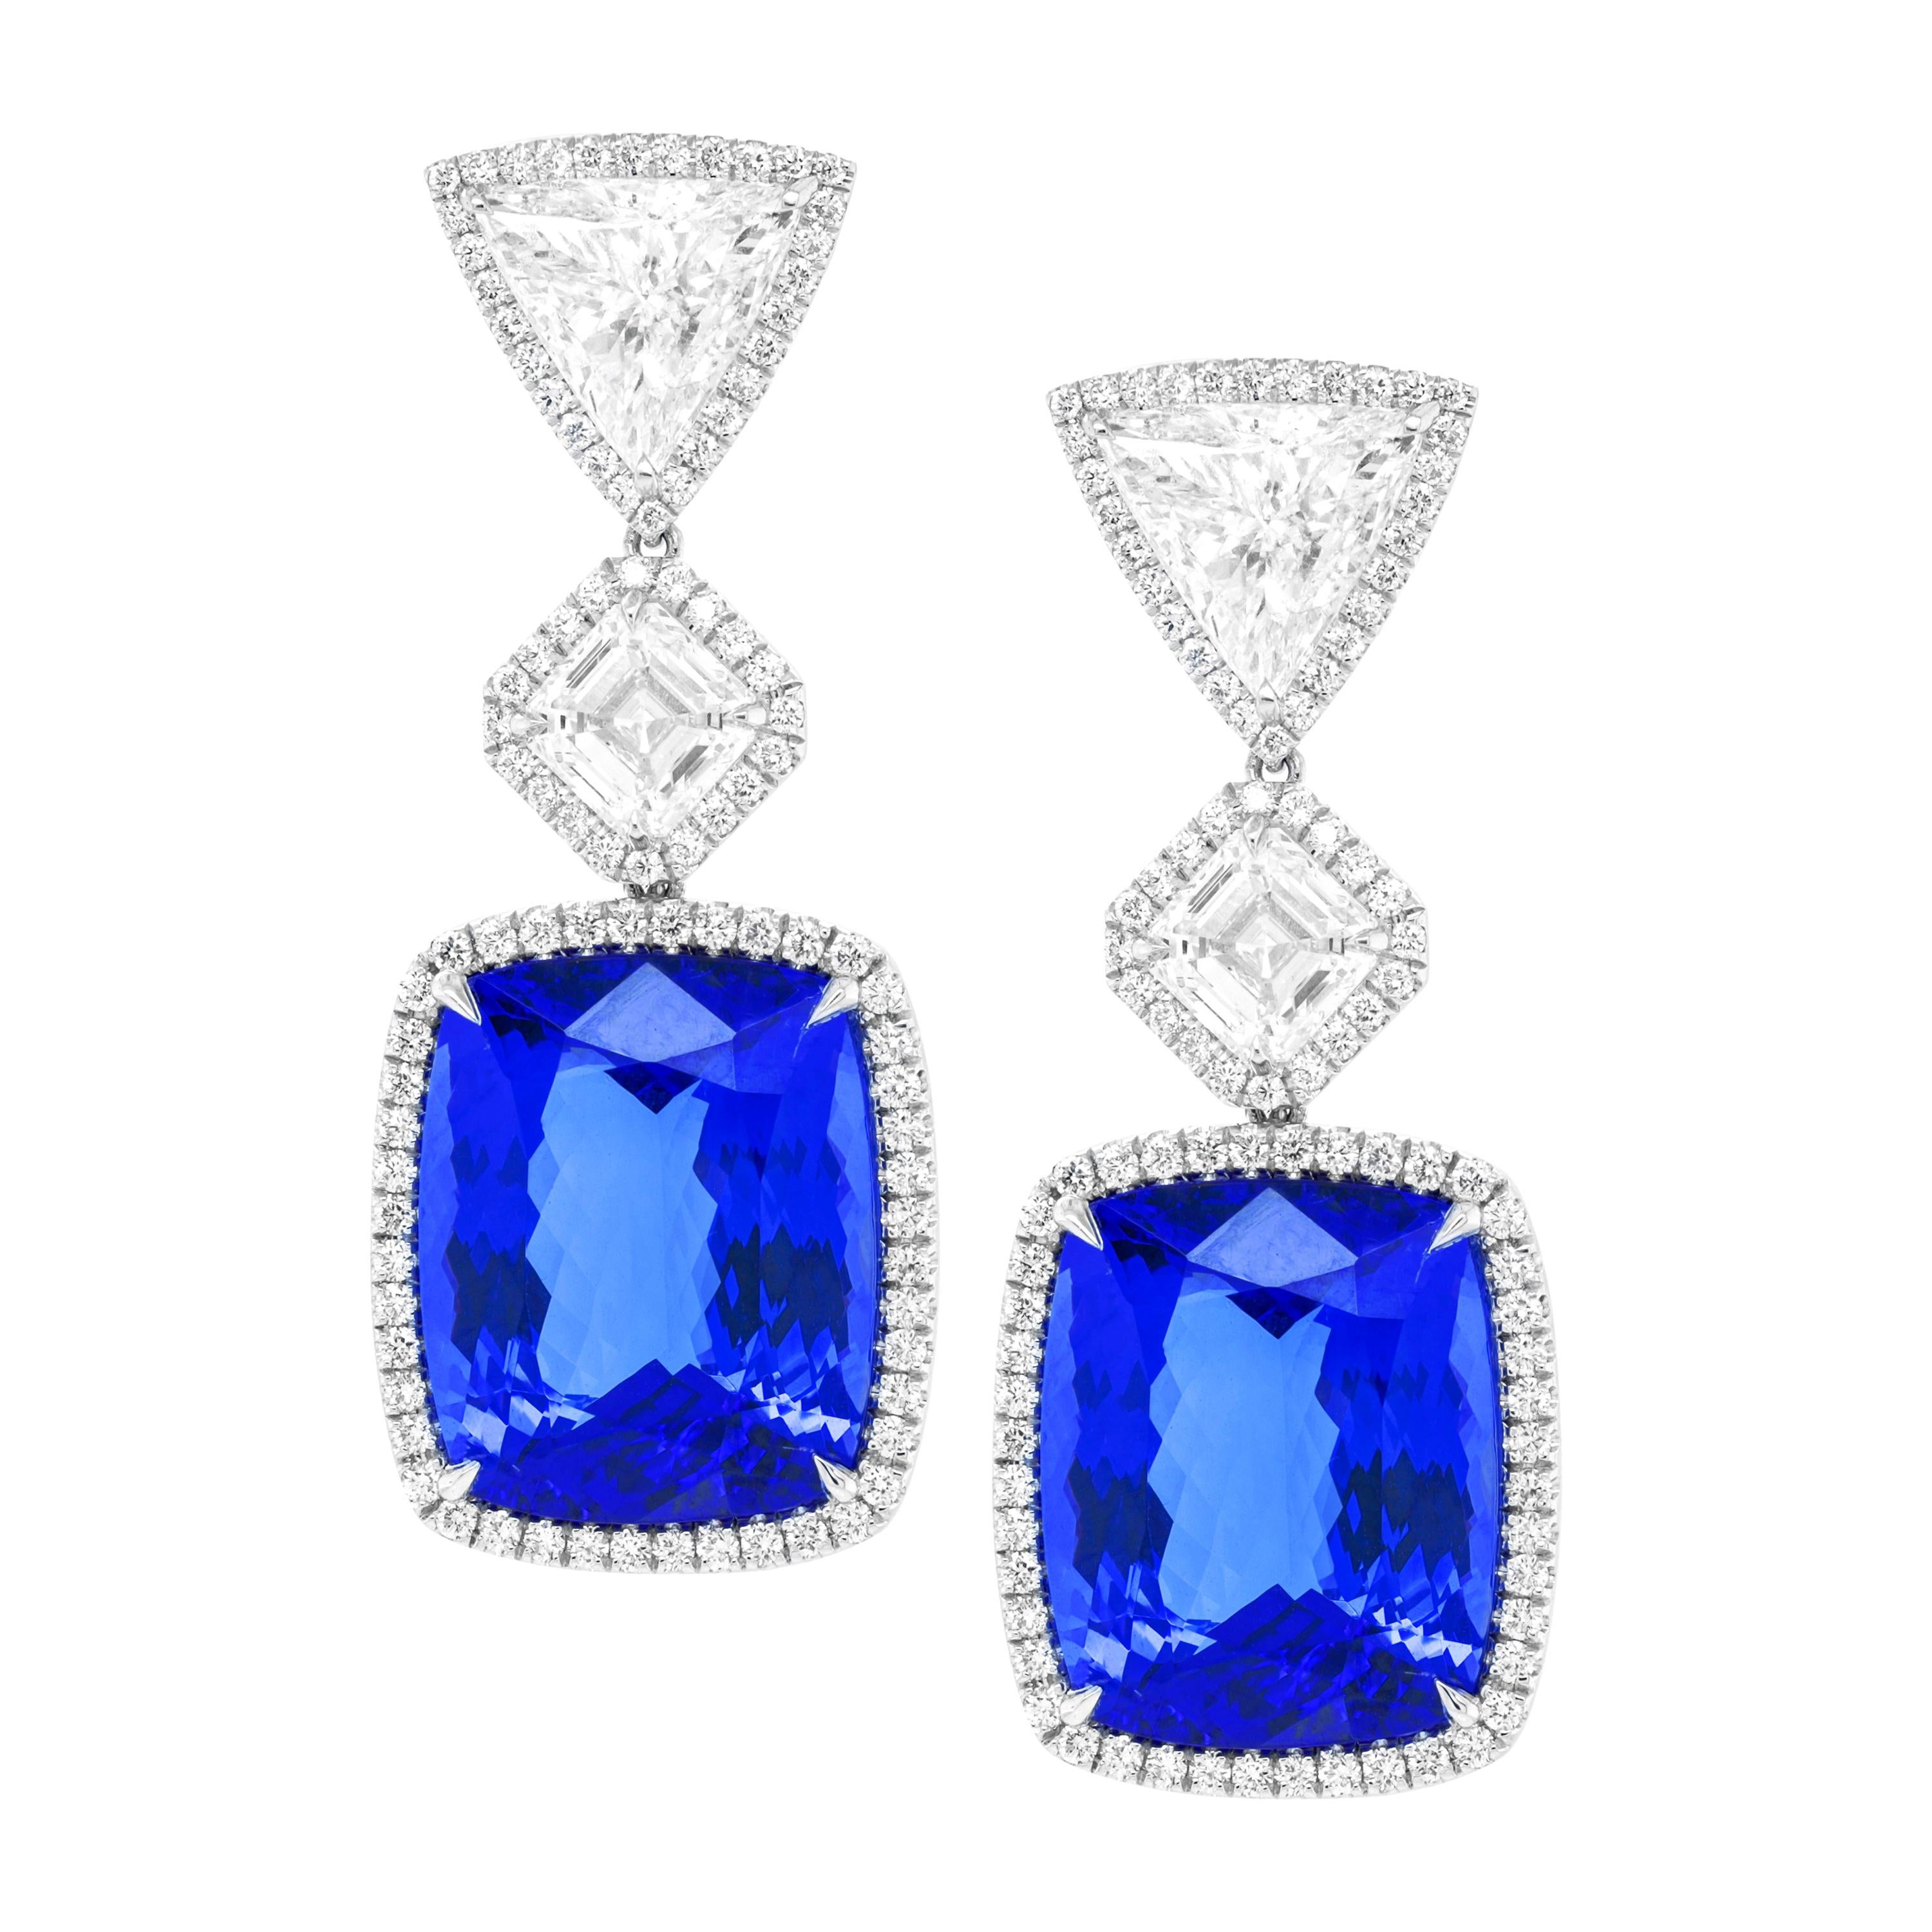 Diamond and Sapphire Earrings with Interchangeable Stones in 18kt Gold ...